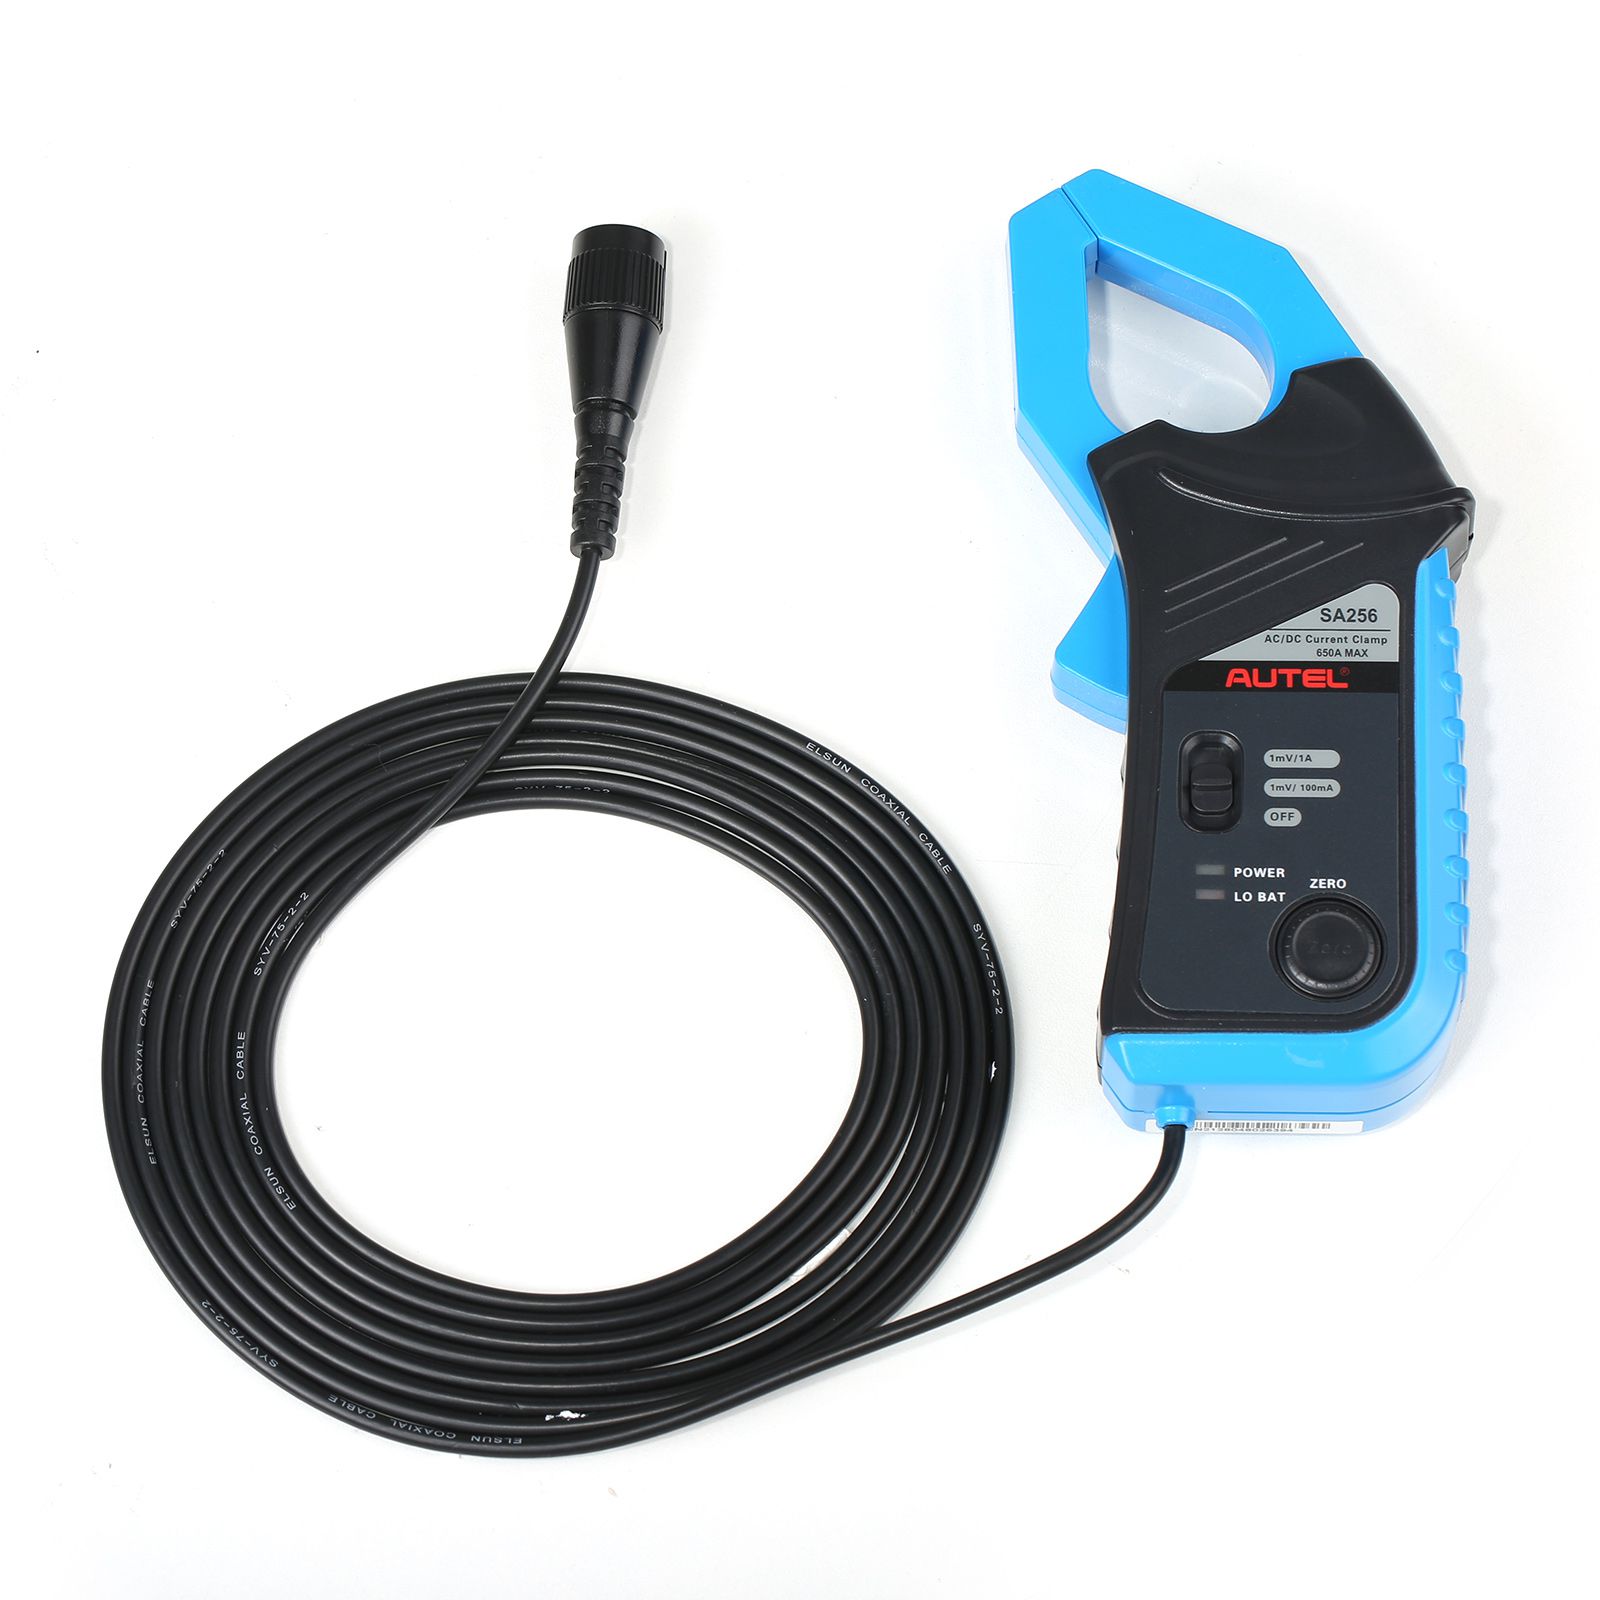  Autel MaxiSys MSOAK Oscilloscope Accessory Kit Work with the MaxiFlash VCMI Included with Autel Ultra, MS919 and MP408